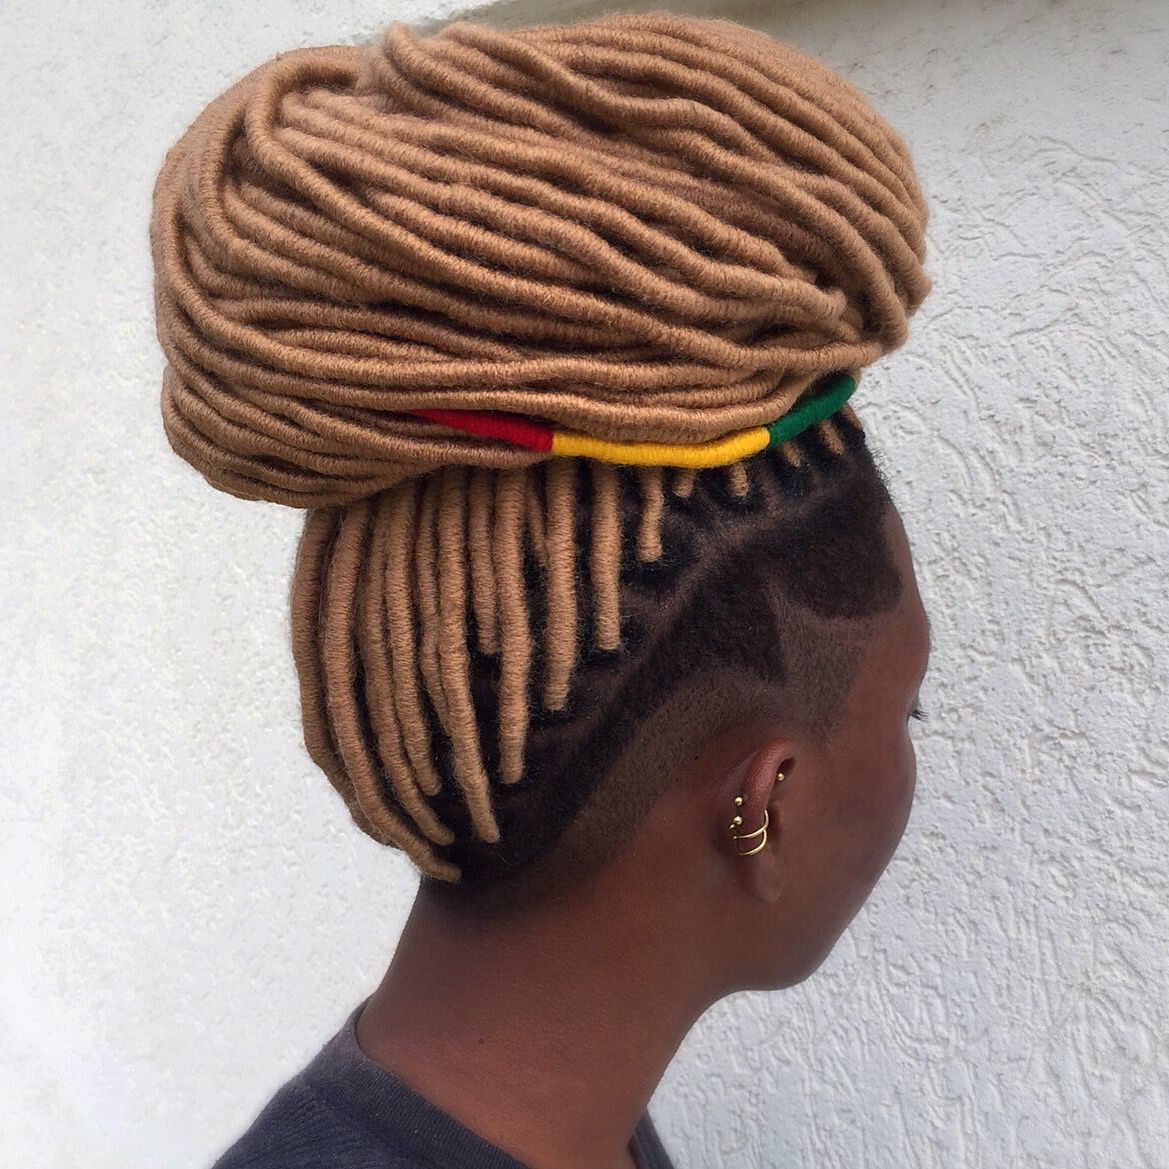 Fashionable Blonde Ponytail Hairstyles With Yarn Within Yarn Locs, Faux Locs, Blonde Dreads, Blonde Locs, Blonde (View 3 of 20)